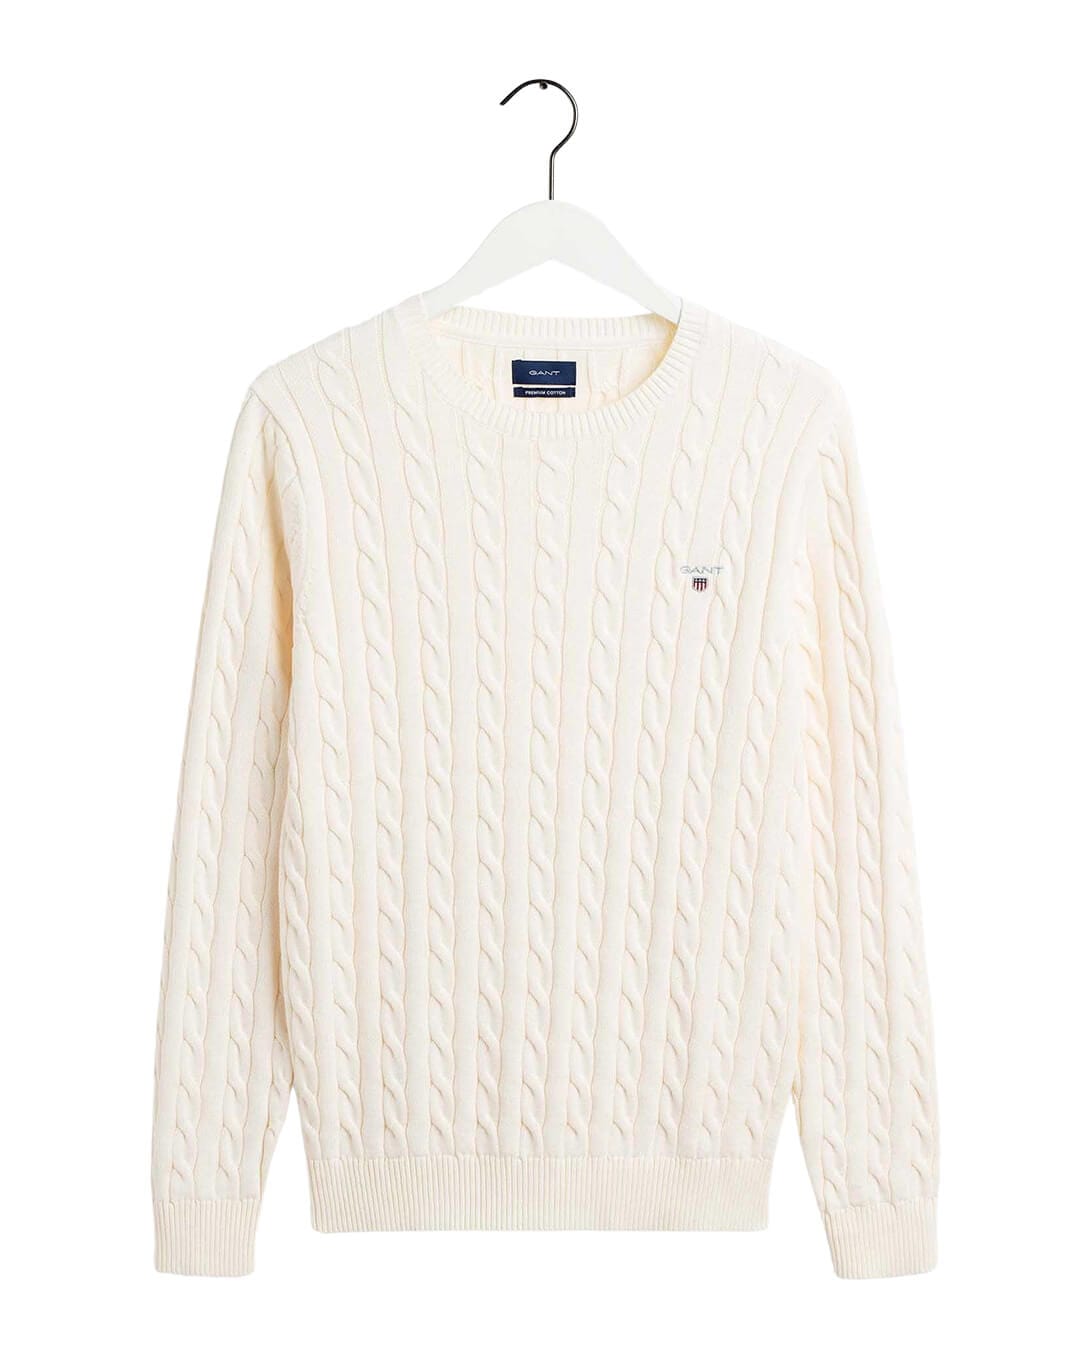 Gant Jumpers Gant Cream Cable Knit Sweater